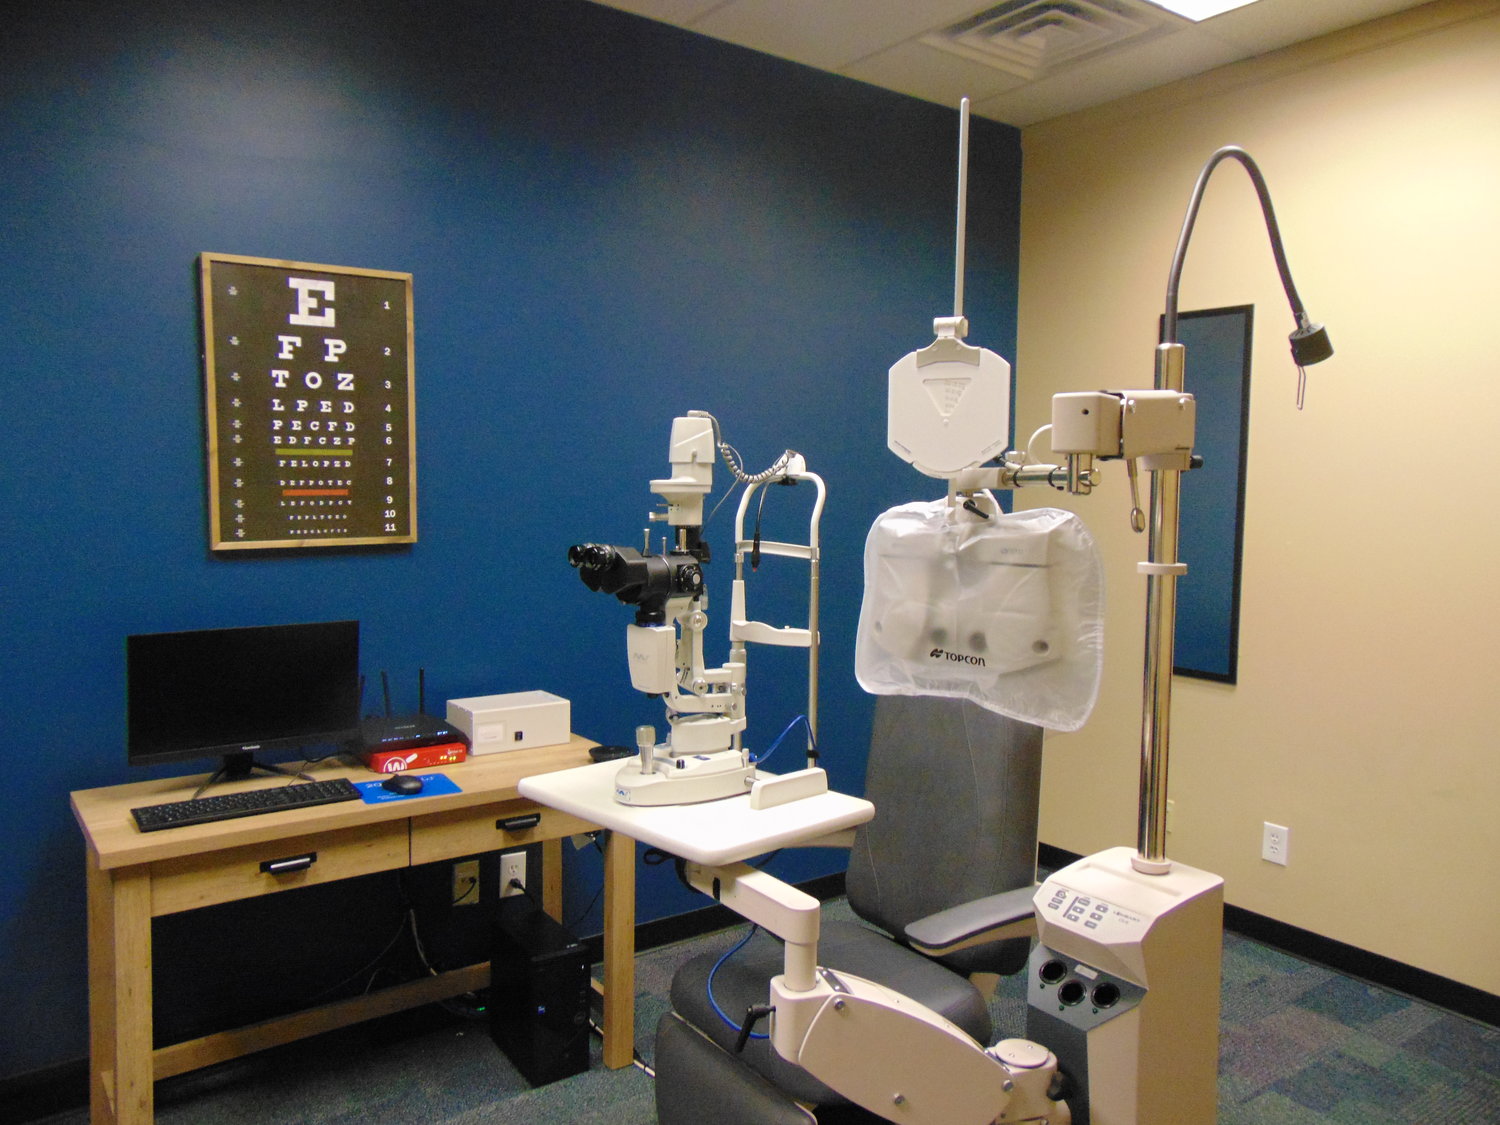 Cutting Edge Optical also has a tele-optometry process for eye exams.